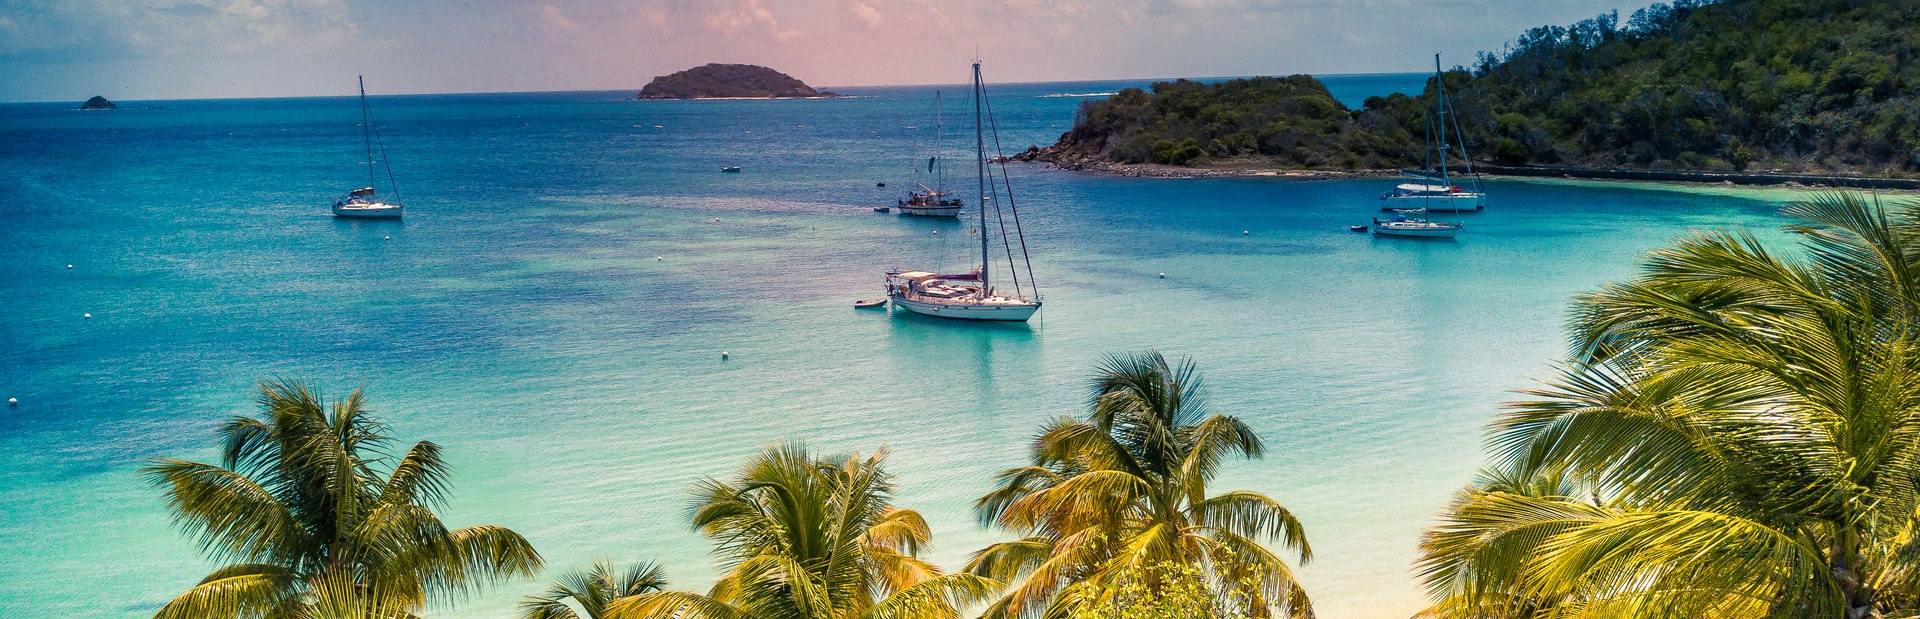 Things to see & do inSt Vincent and the Grenadines